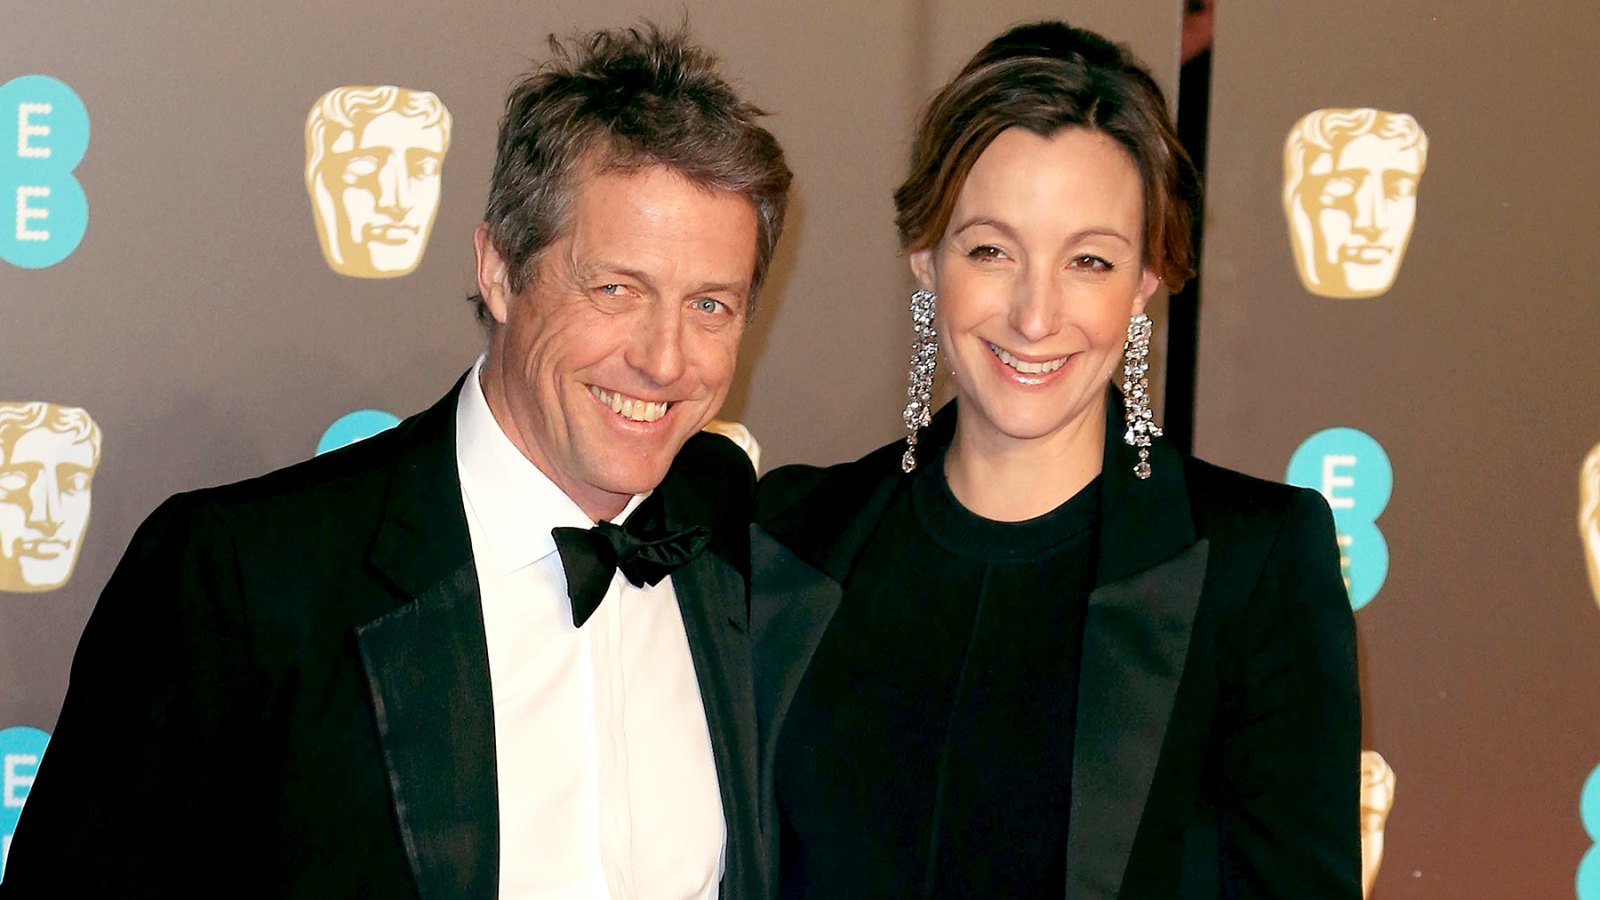 Hugh-Grant-and-Anna-Eberstein-kidnapped